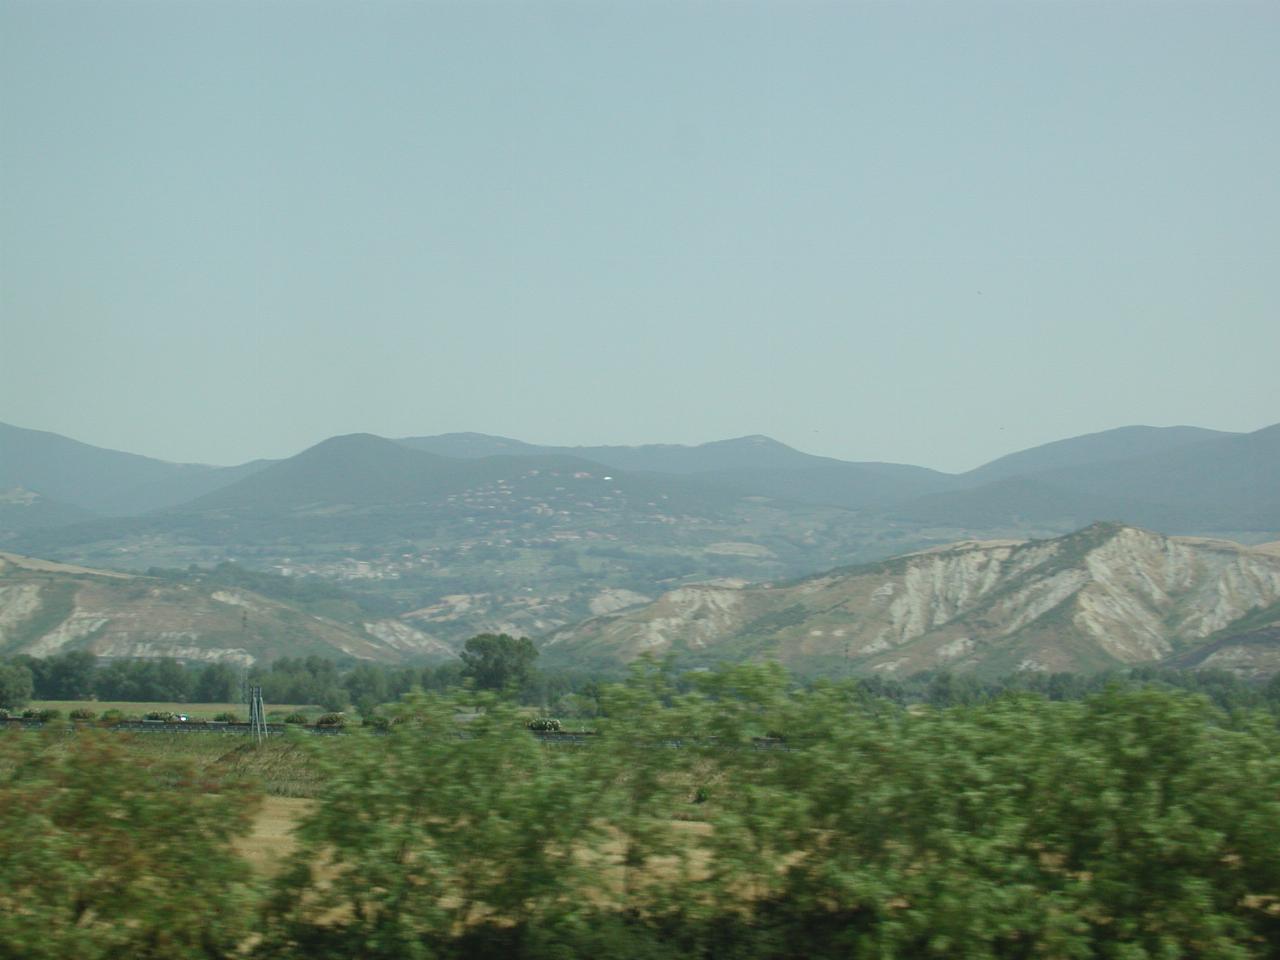 Somewhere between Rome and Florence, from the train